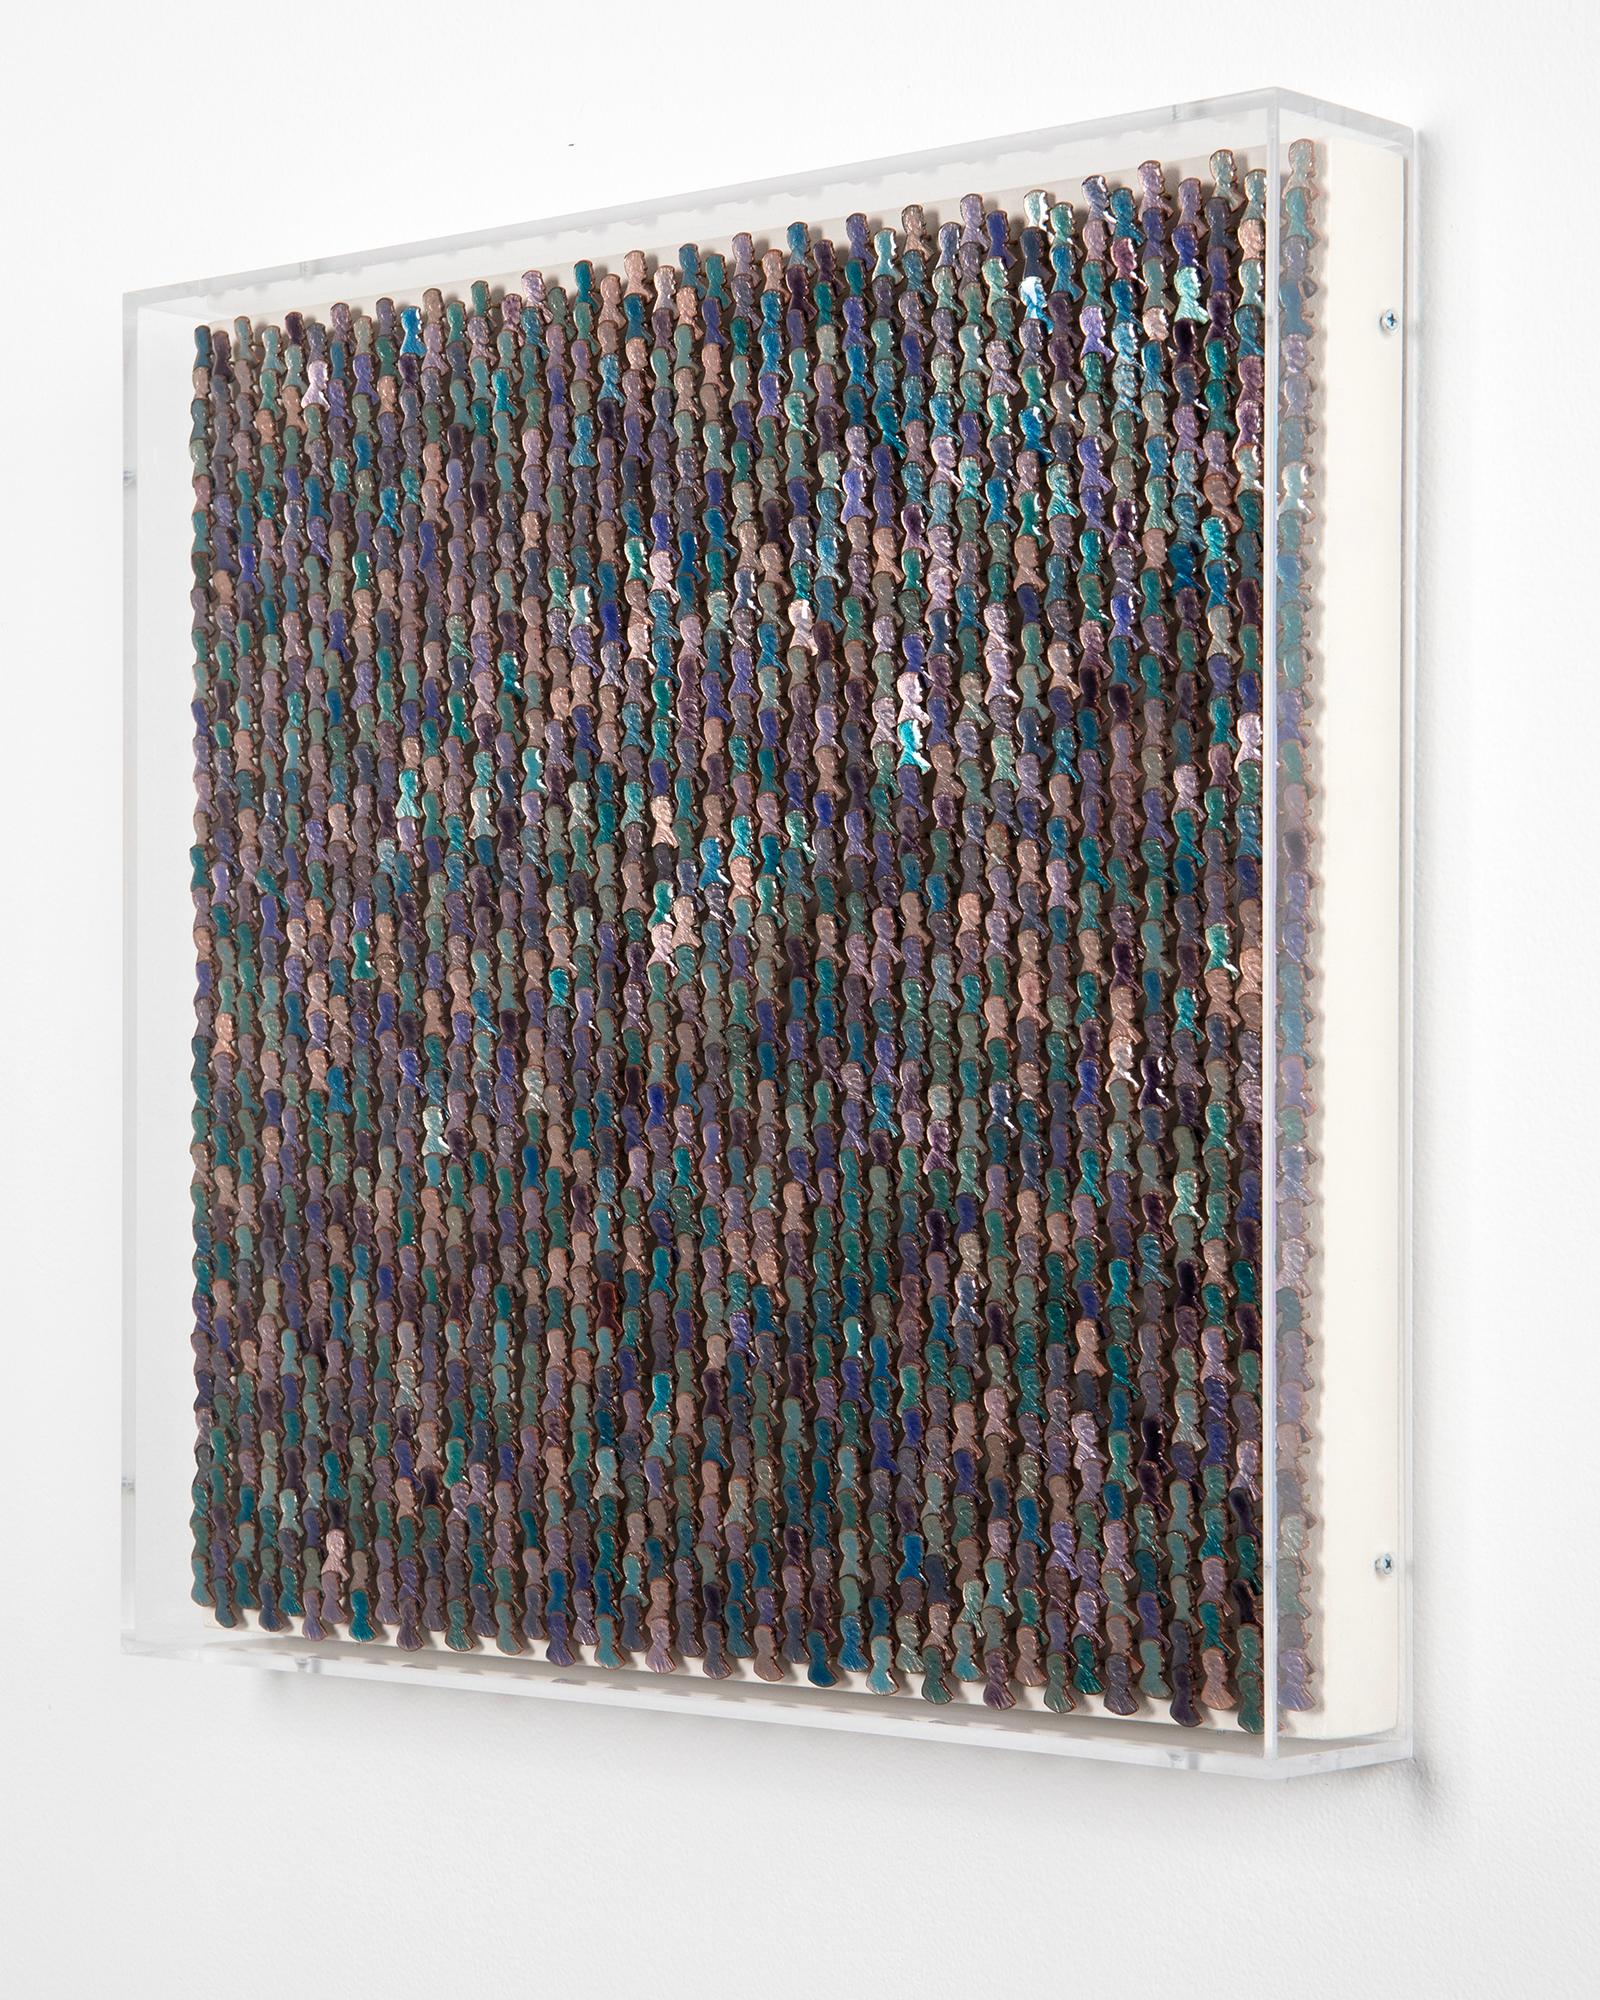 Stacey Lee Webber

Abe Crowd: Sapphire

16.5” x 16.5” acrylic frame

transparent vitreous glass enamel fused to copper pennies

2023